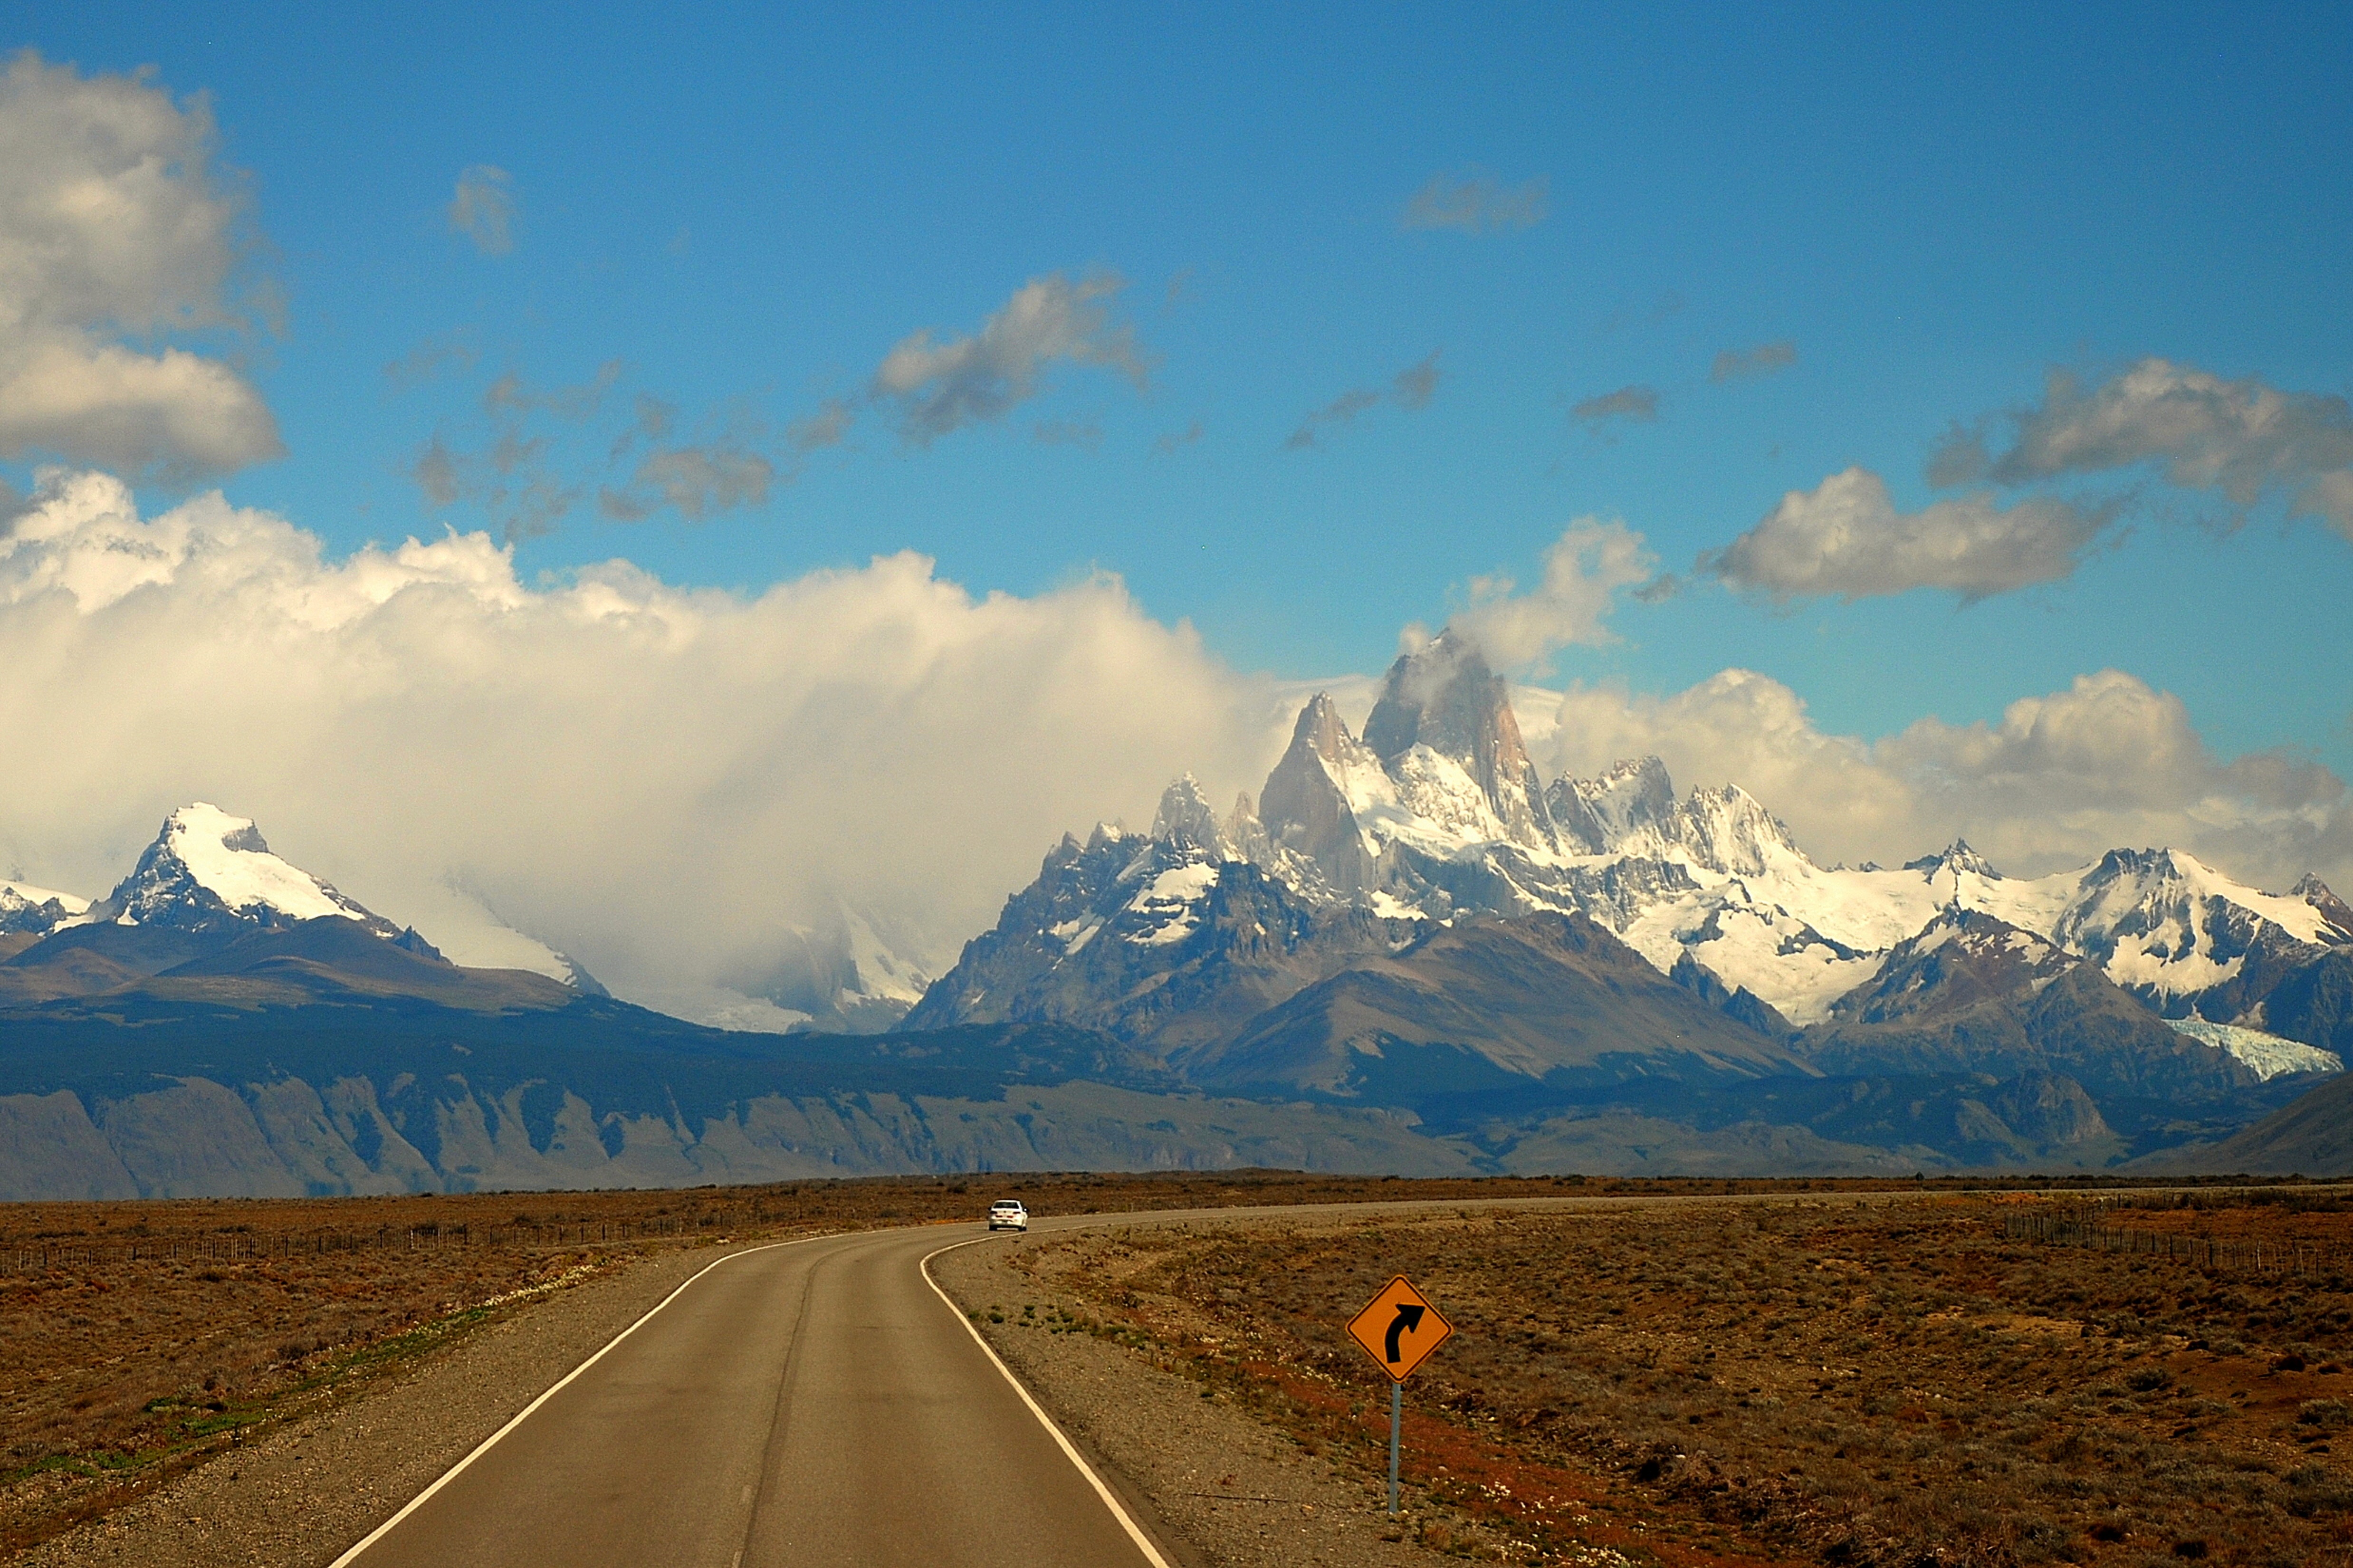 The barren landscape of Patagonia with the Andes in the background.